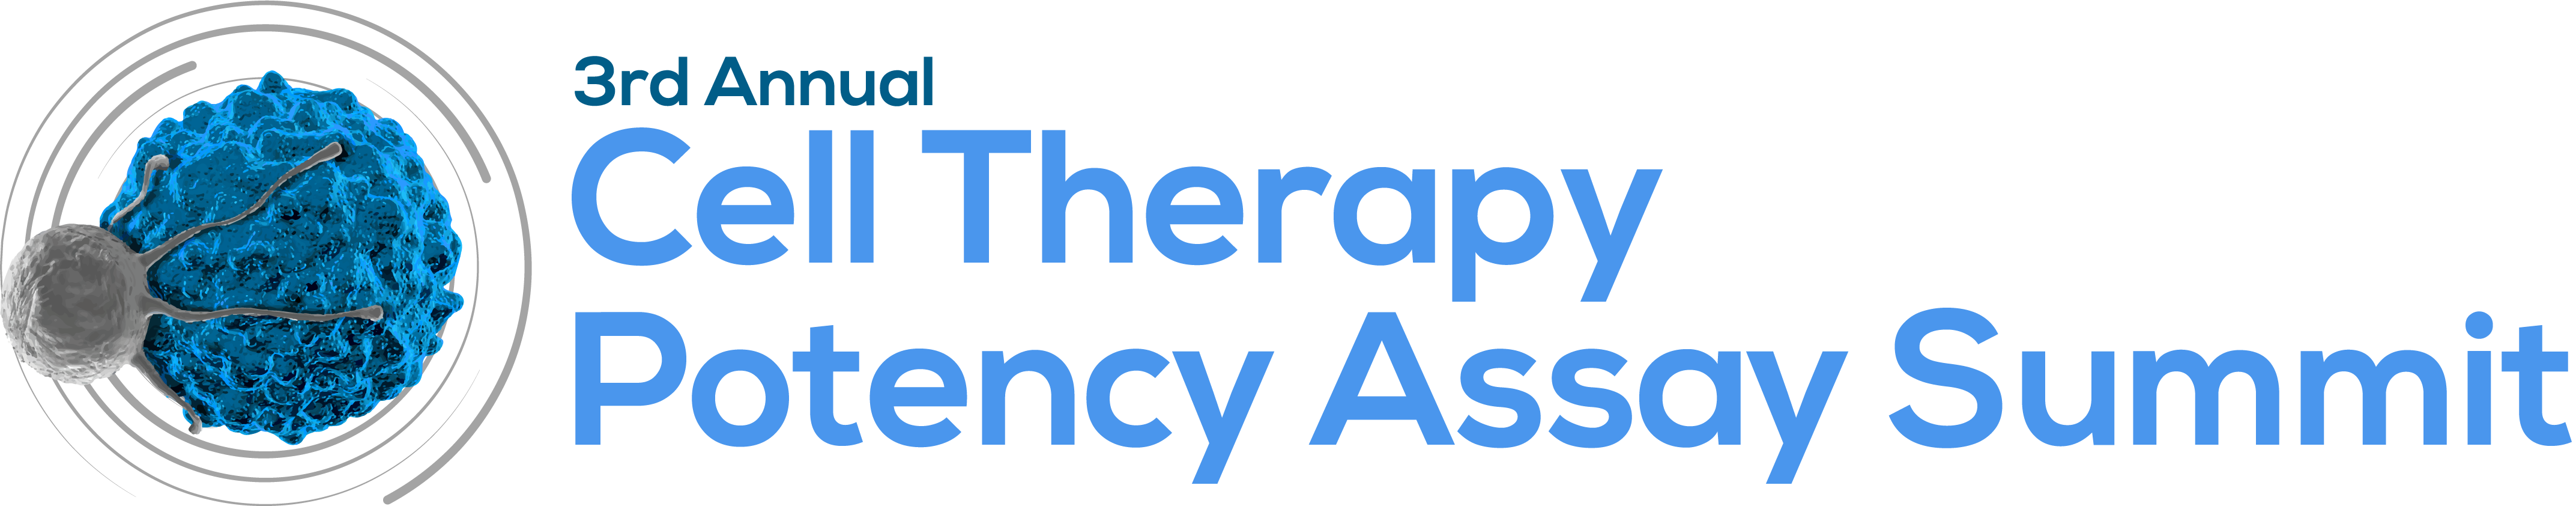 3rd Annual Cell Therapy Potency Assay Summit NO STRAPLINE